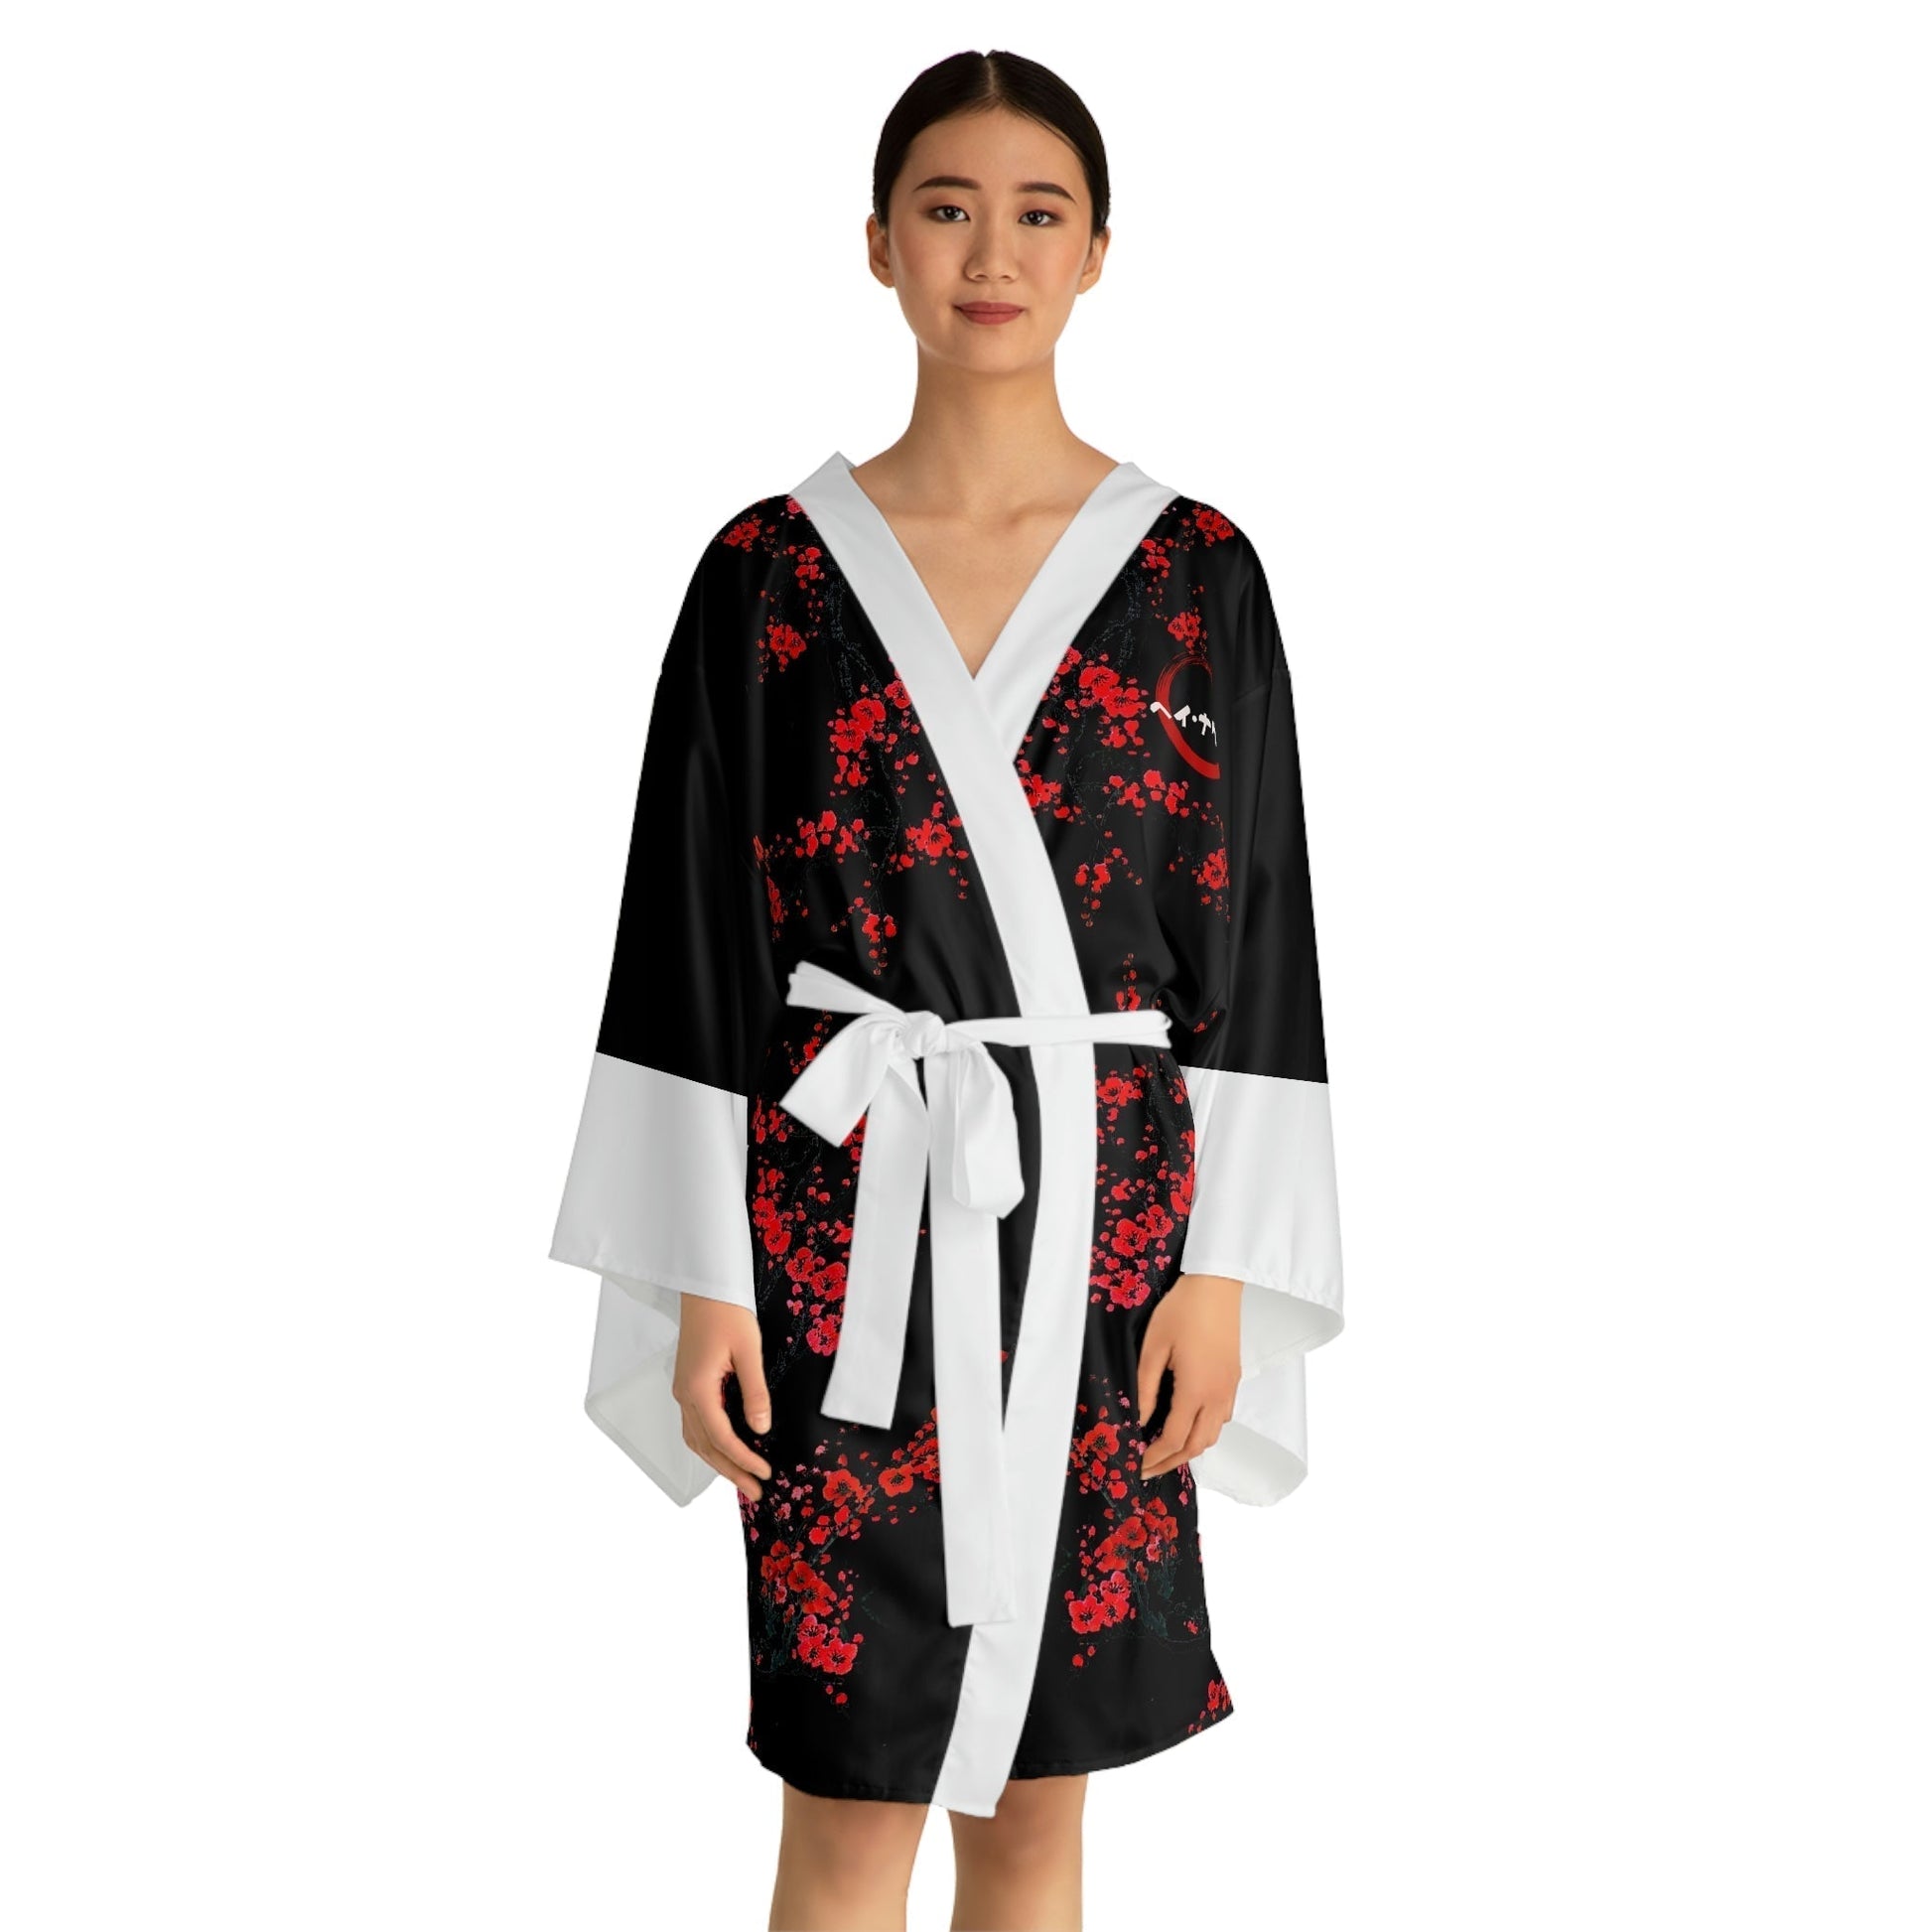 Stand out  with the  Tokyo Nugget Kimono Robe  available at Hey Nugget. Grab yours today!